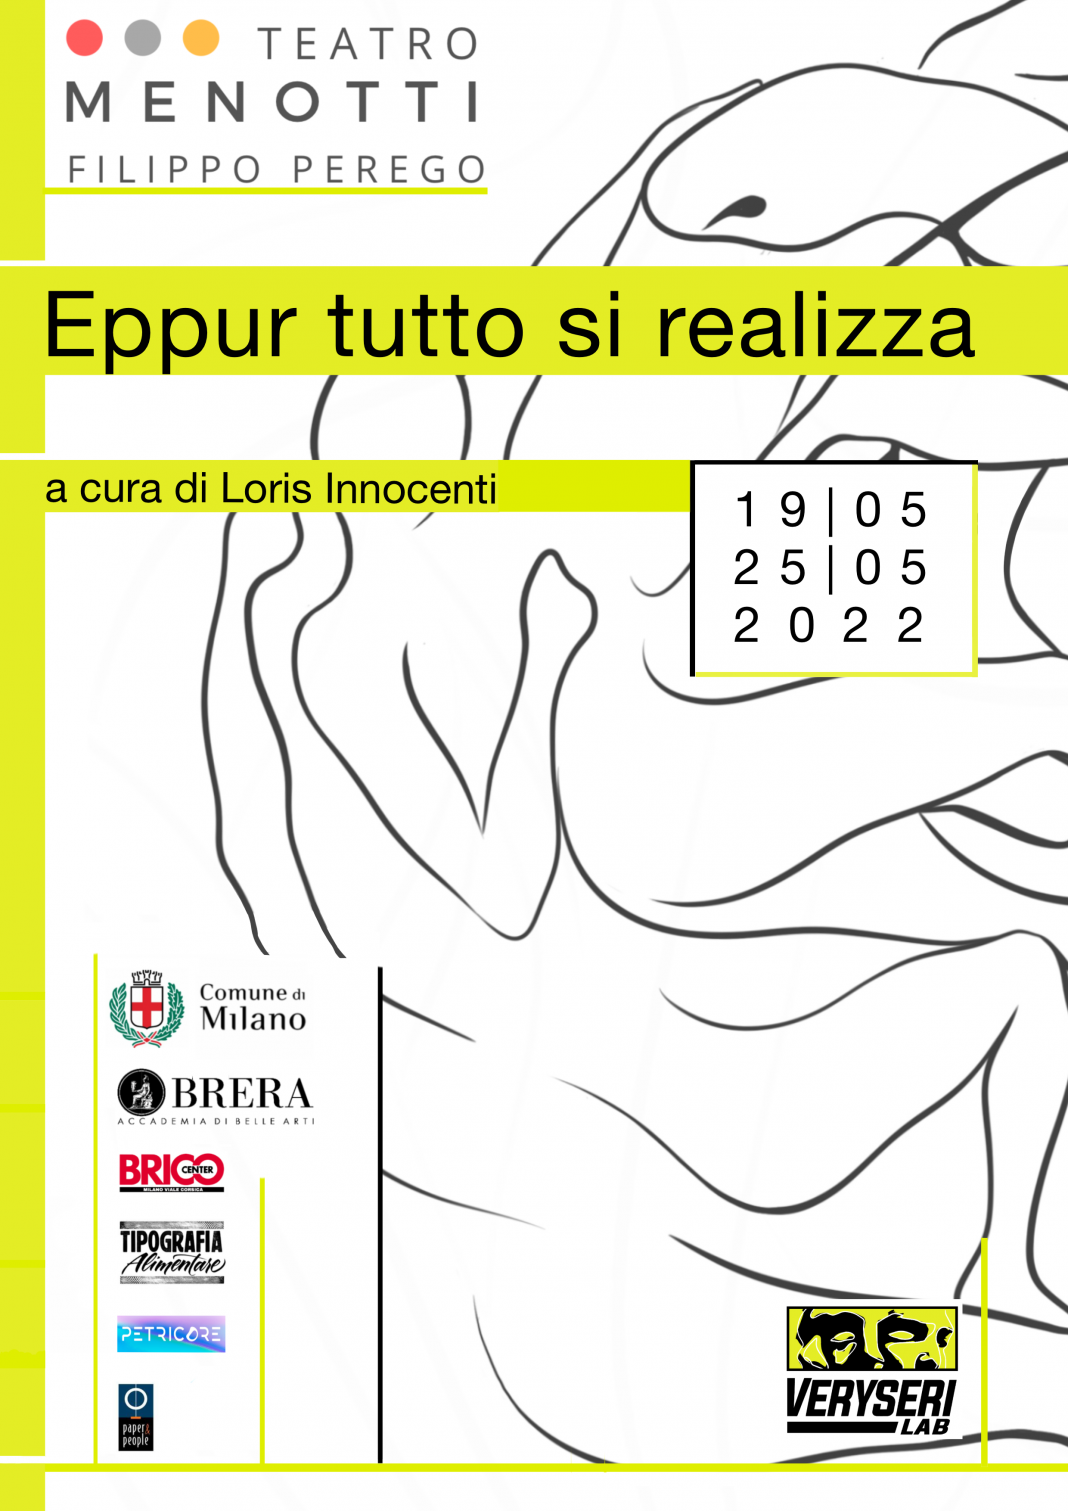 Eppur tutto si realizzahttps://www.exibart.com/repository/media/formidable/11/img/9c5/Locandina-1068x1511.png